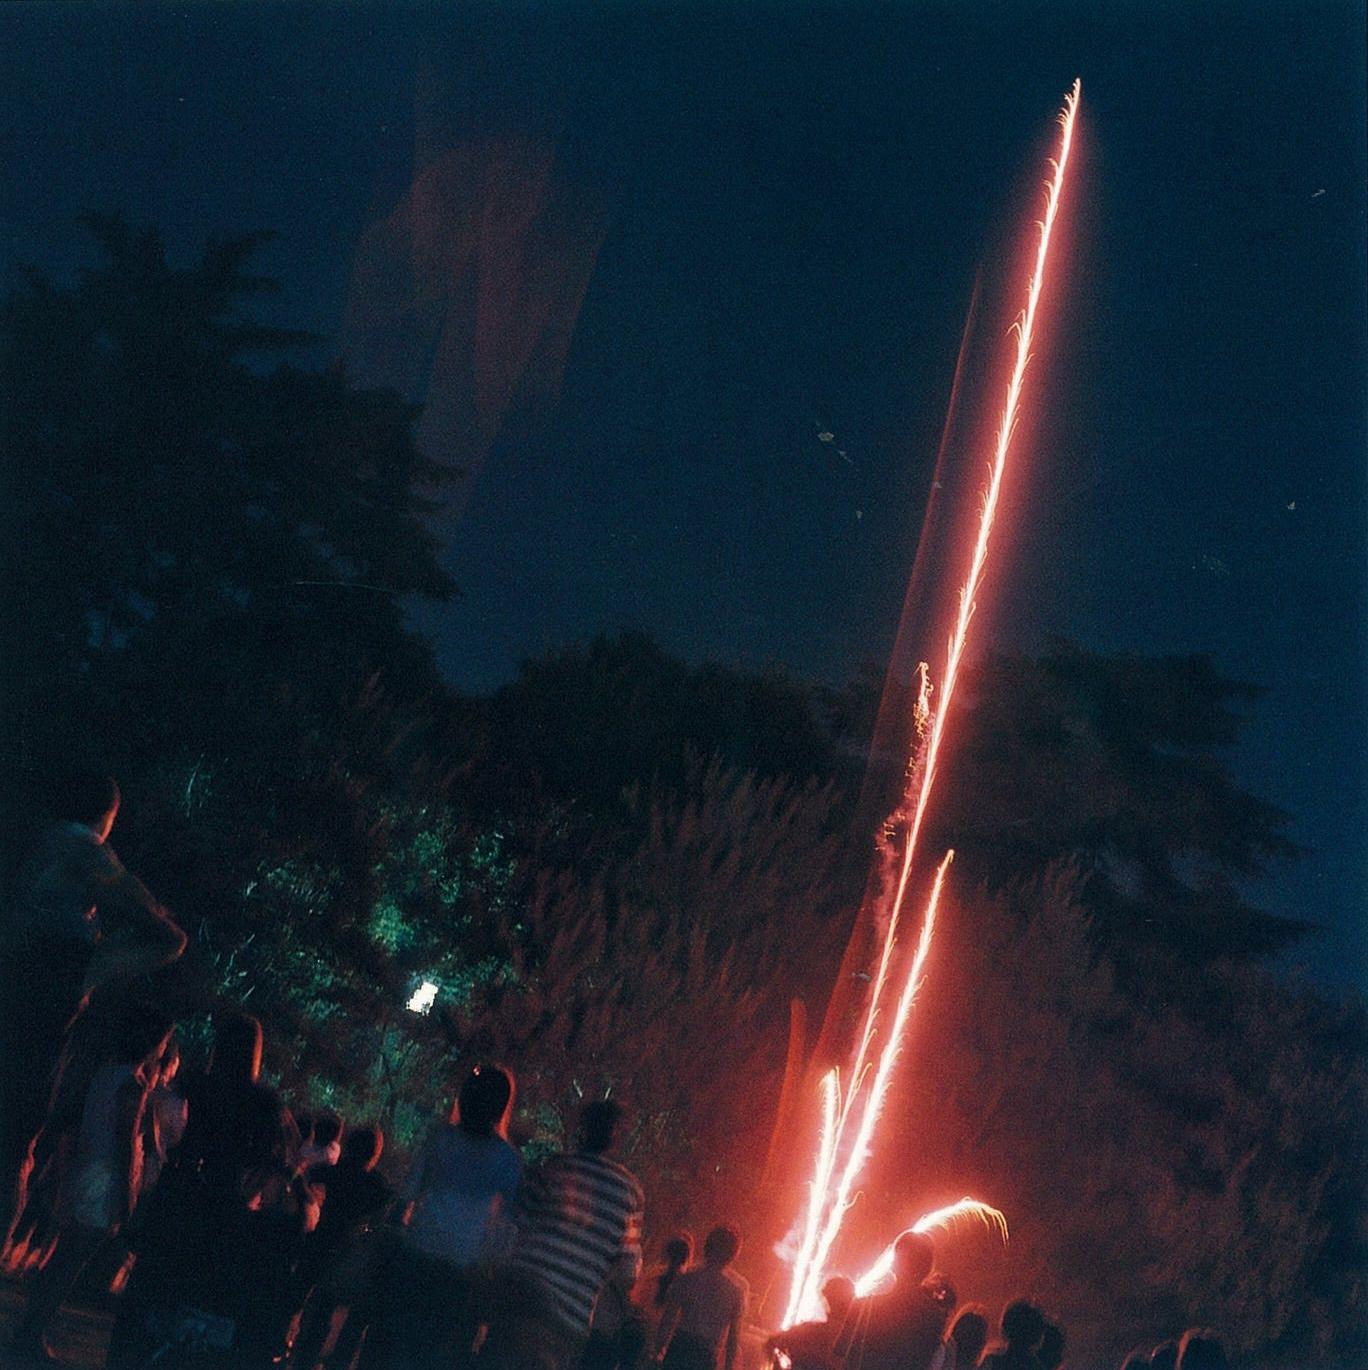 RINKO KAWAUCHI (*1972, Japan)
Untitled, from the series 'Hanabi'
2001
C–type print
Sheet 25.4 x 20.3  cm (10 x 8 in.)
Edition of 6; Ed. no. 3/6 
framed only 

Reminiscent of Japanese photography of the 1960s Rinko Kawauchi’s work is the search for